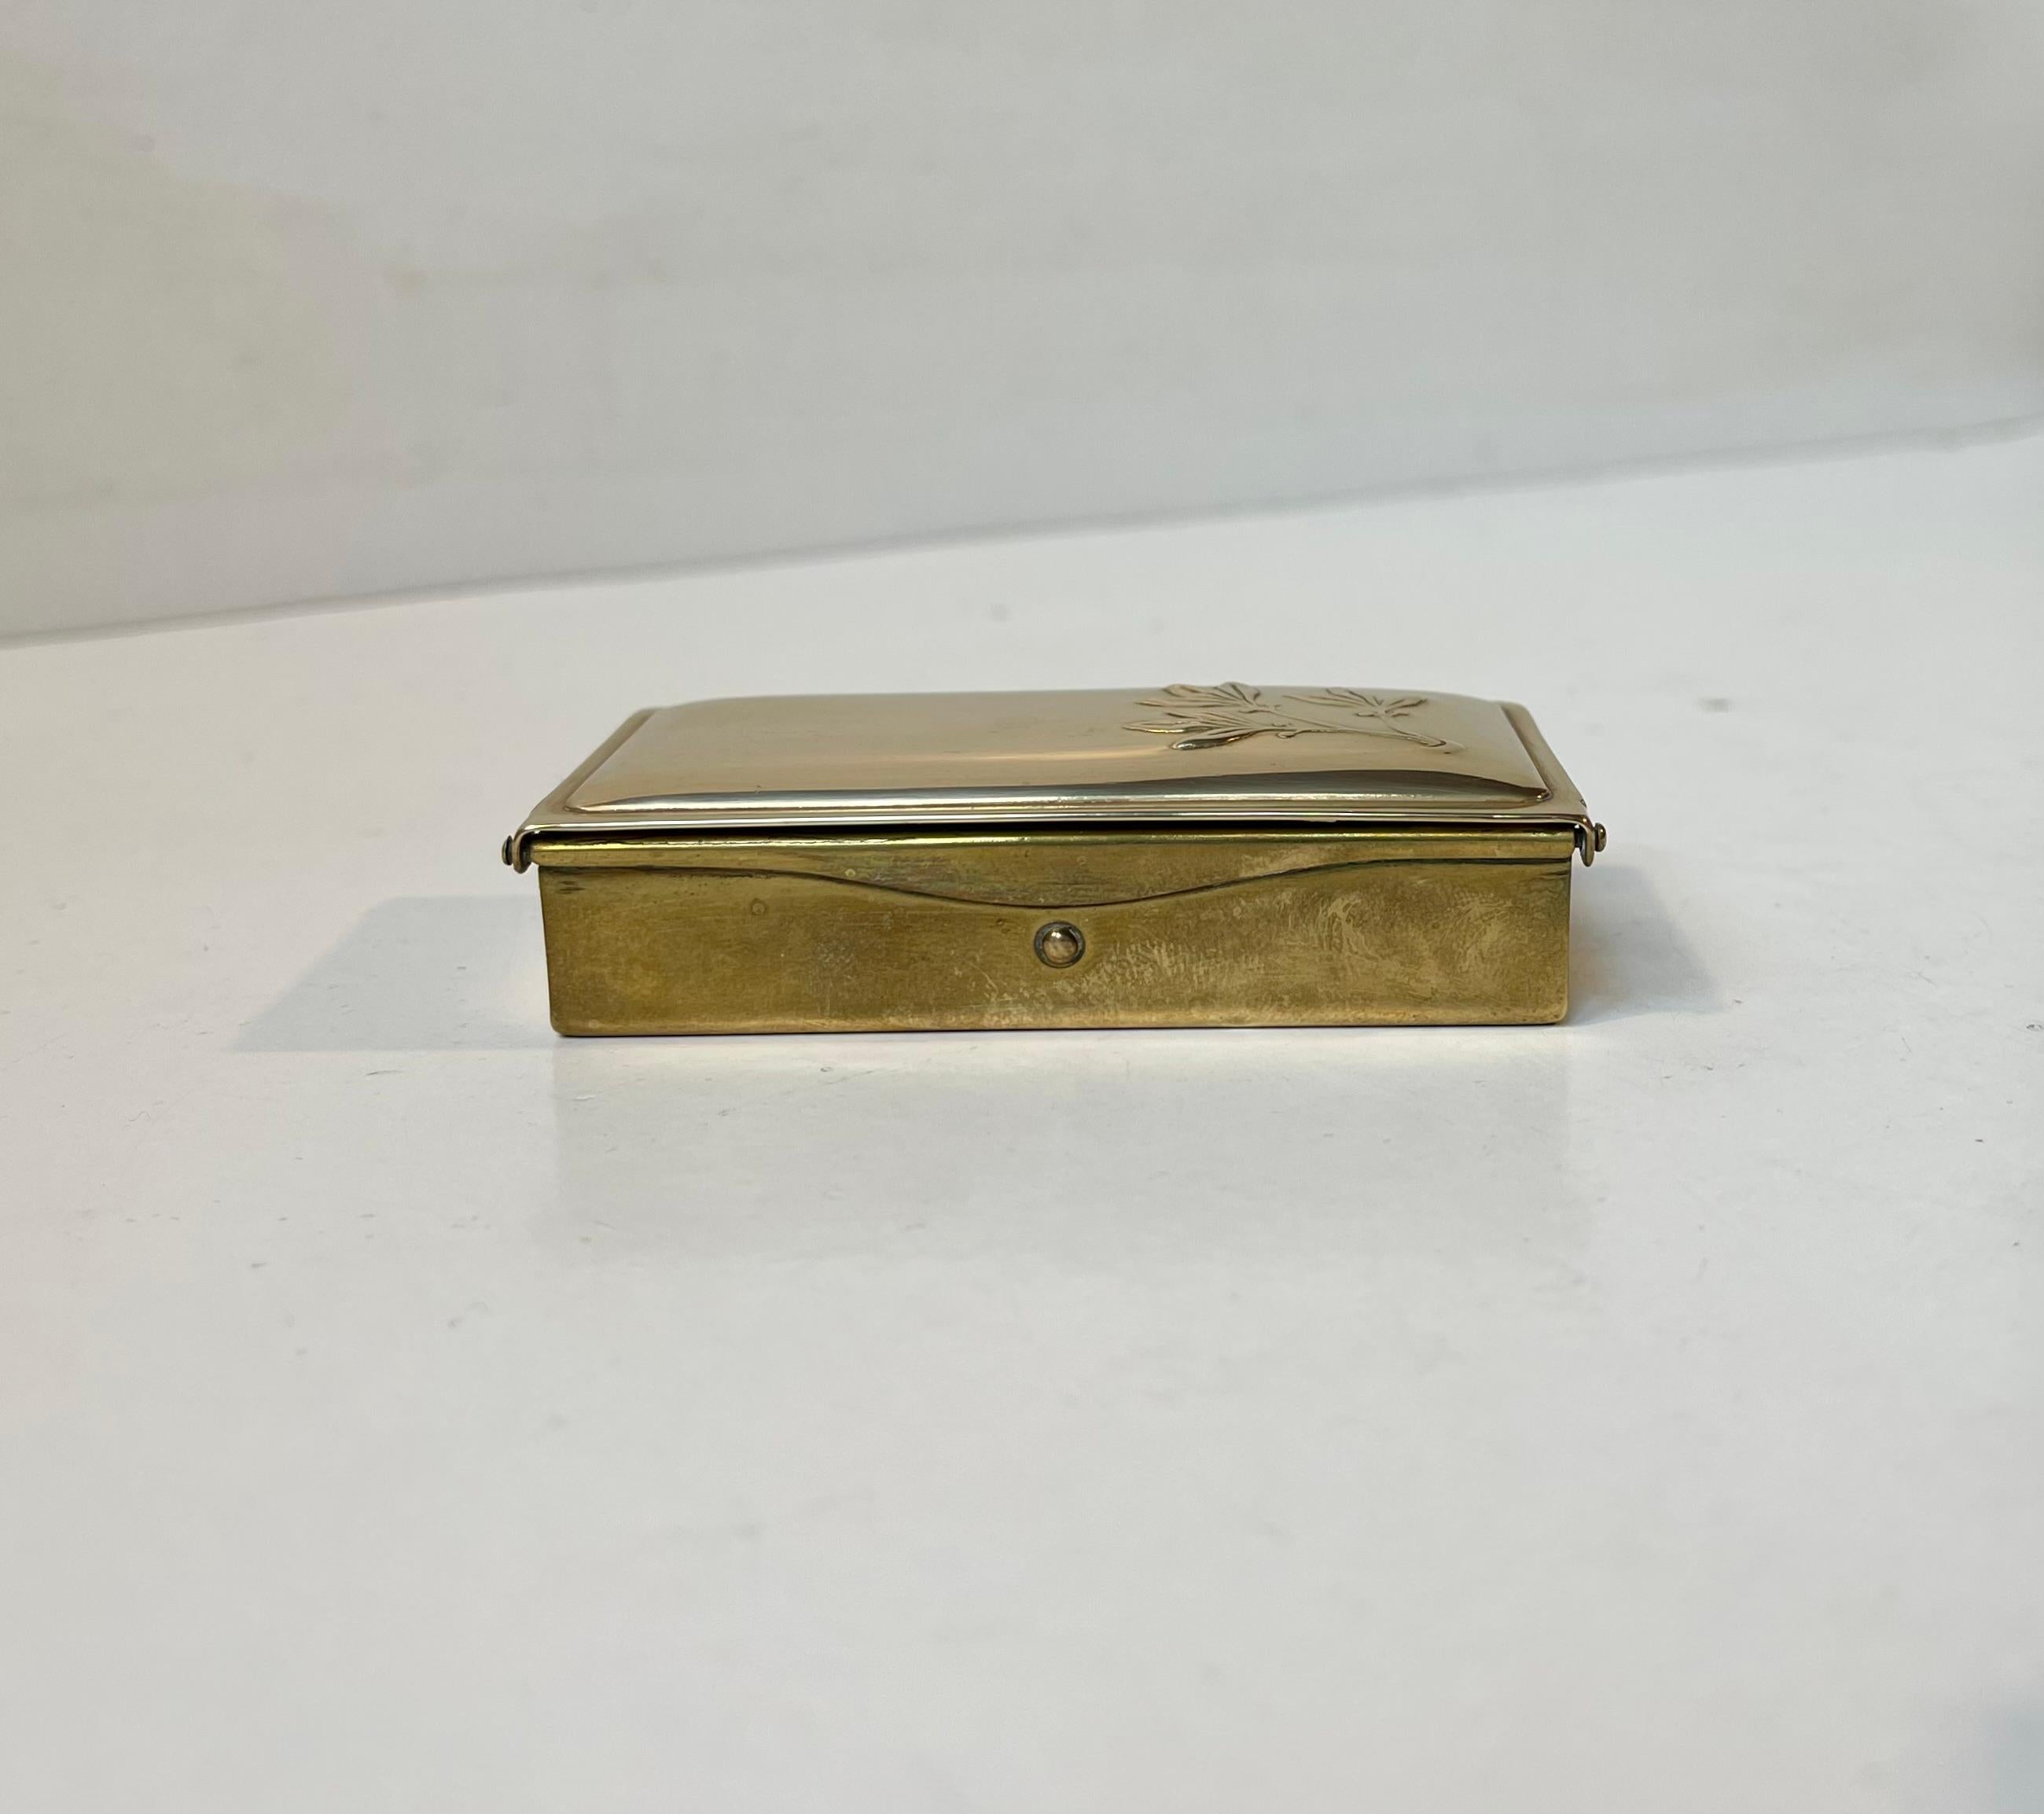 Practical 3 compartment stamp or pill box in brass. Beautifully finished and ingenious mechanism. Made in Scandinavia or England during the 1920s or 30s. Measurements: 8x4,5x2 cm.

Free World wide express shipping.